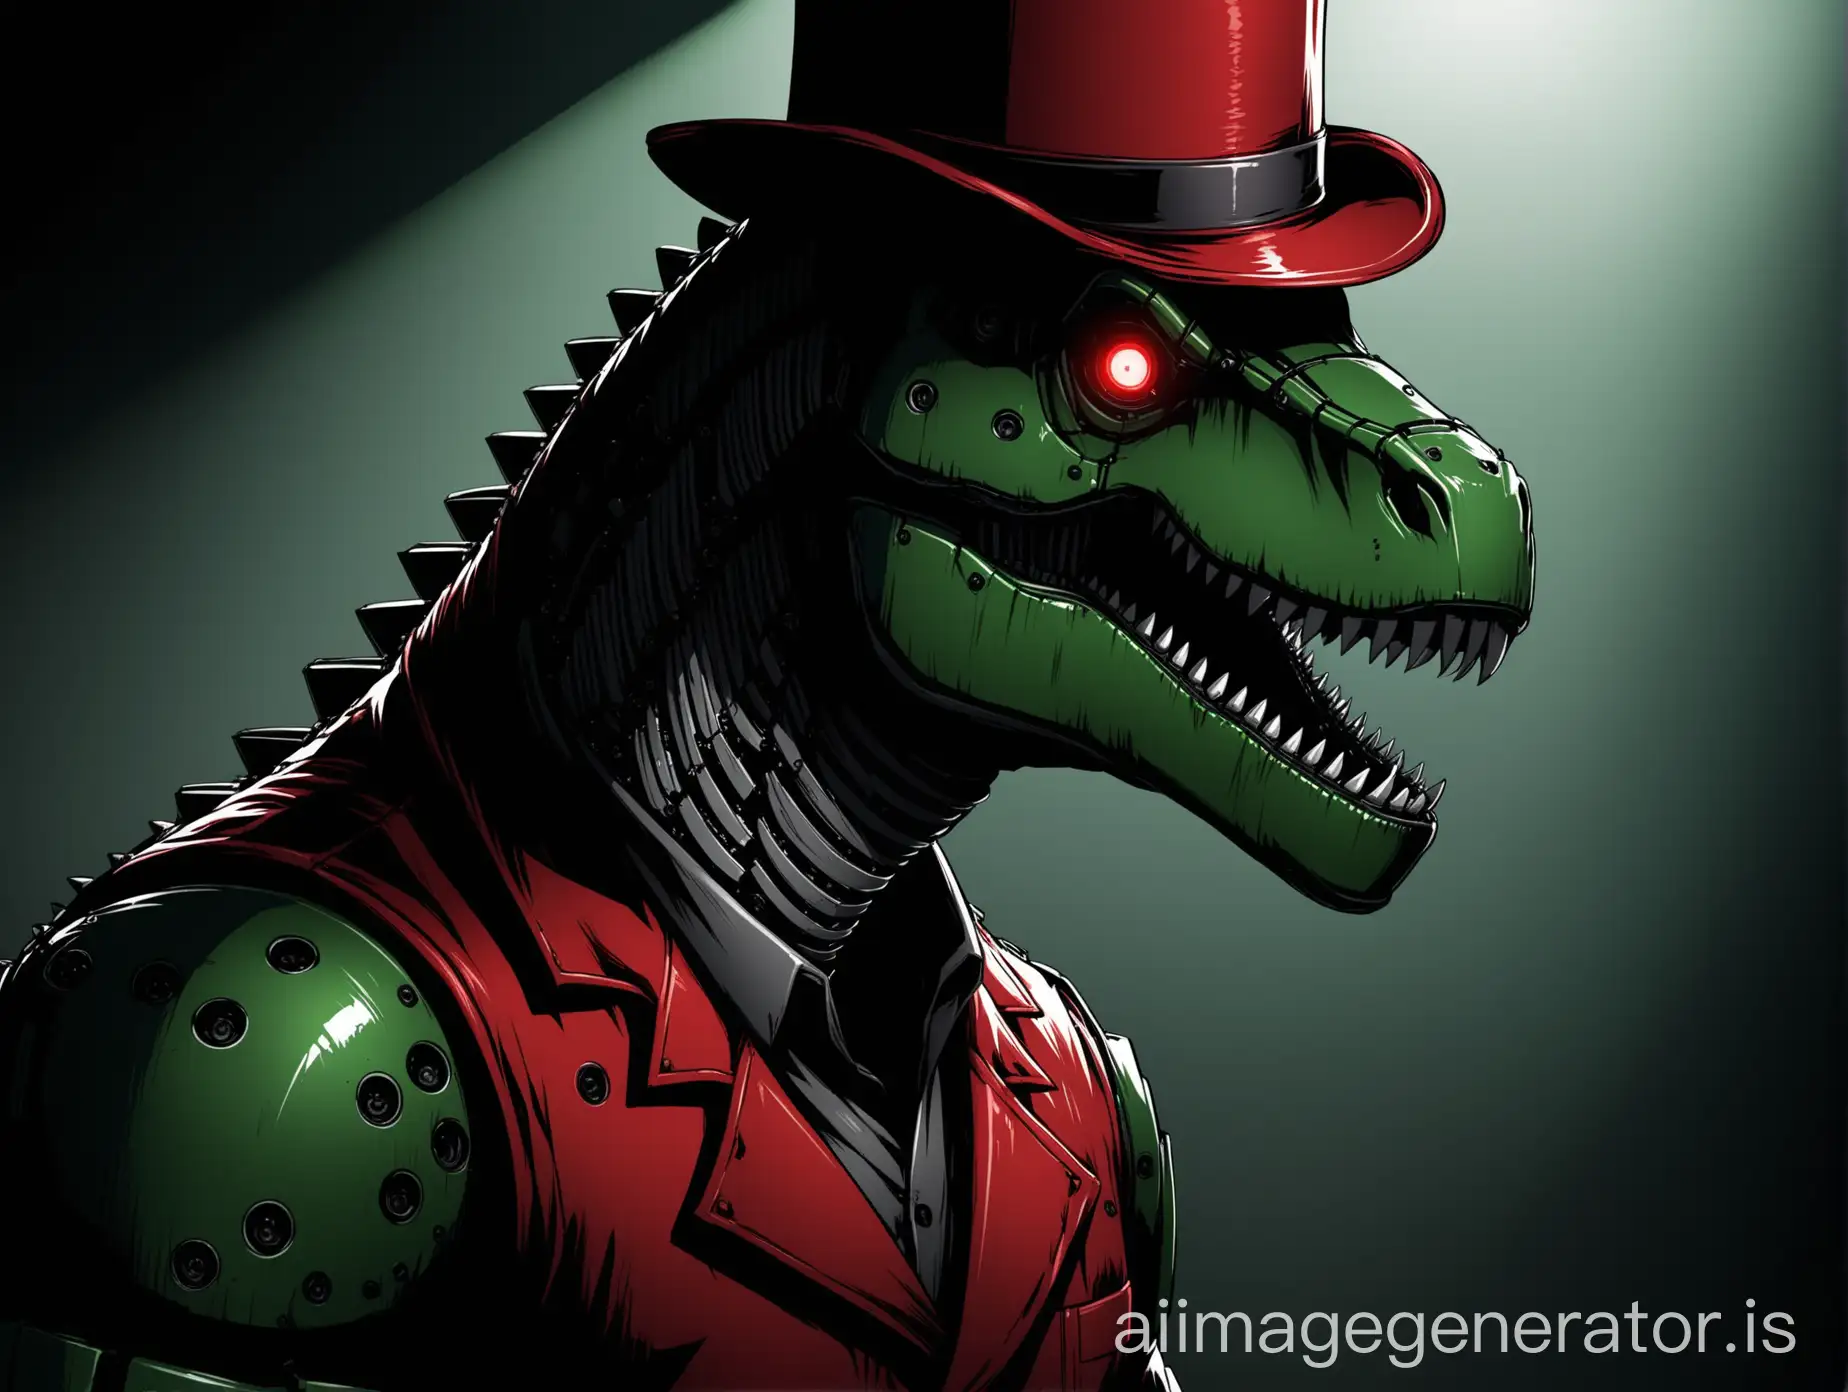 Illustrate a close-up, eerie image of a male T-Rex animatronic inspired by Five Nights at Freddy's. The dark green and gray Rex, with red accents, sports a red top hat with black stripes, glasses, and holds a book. Emphasize his robotic features in dim lighting with shadows. Use dark tones with red highlights. Capture a sinister mood with a focus on mechanical details. (Image: Illustration, Sinister, Dark tones with red accents, Close-up angle, Robotic features, Dim lighting, Shadows)